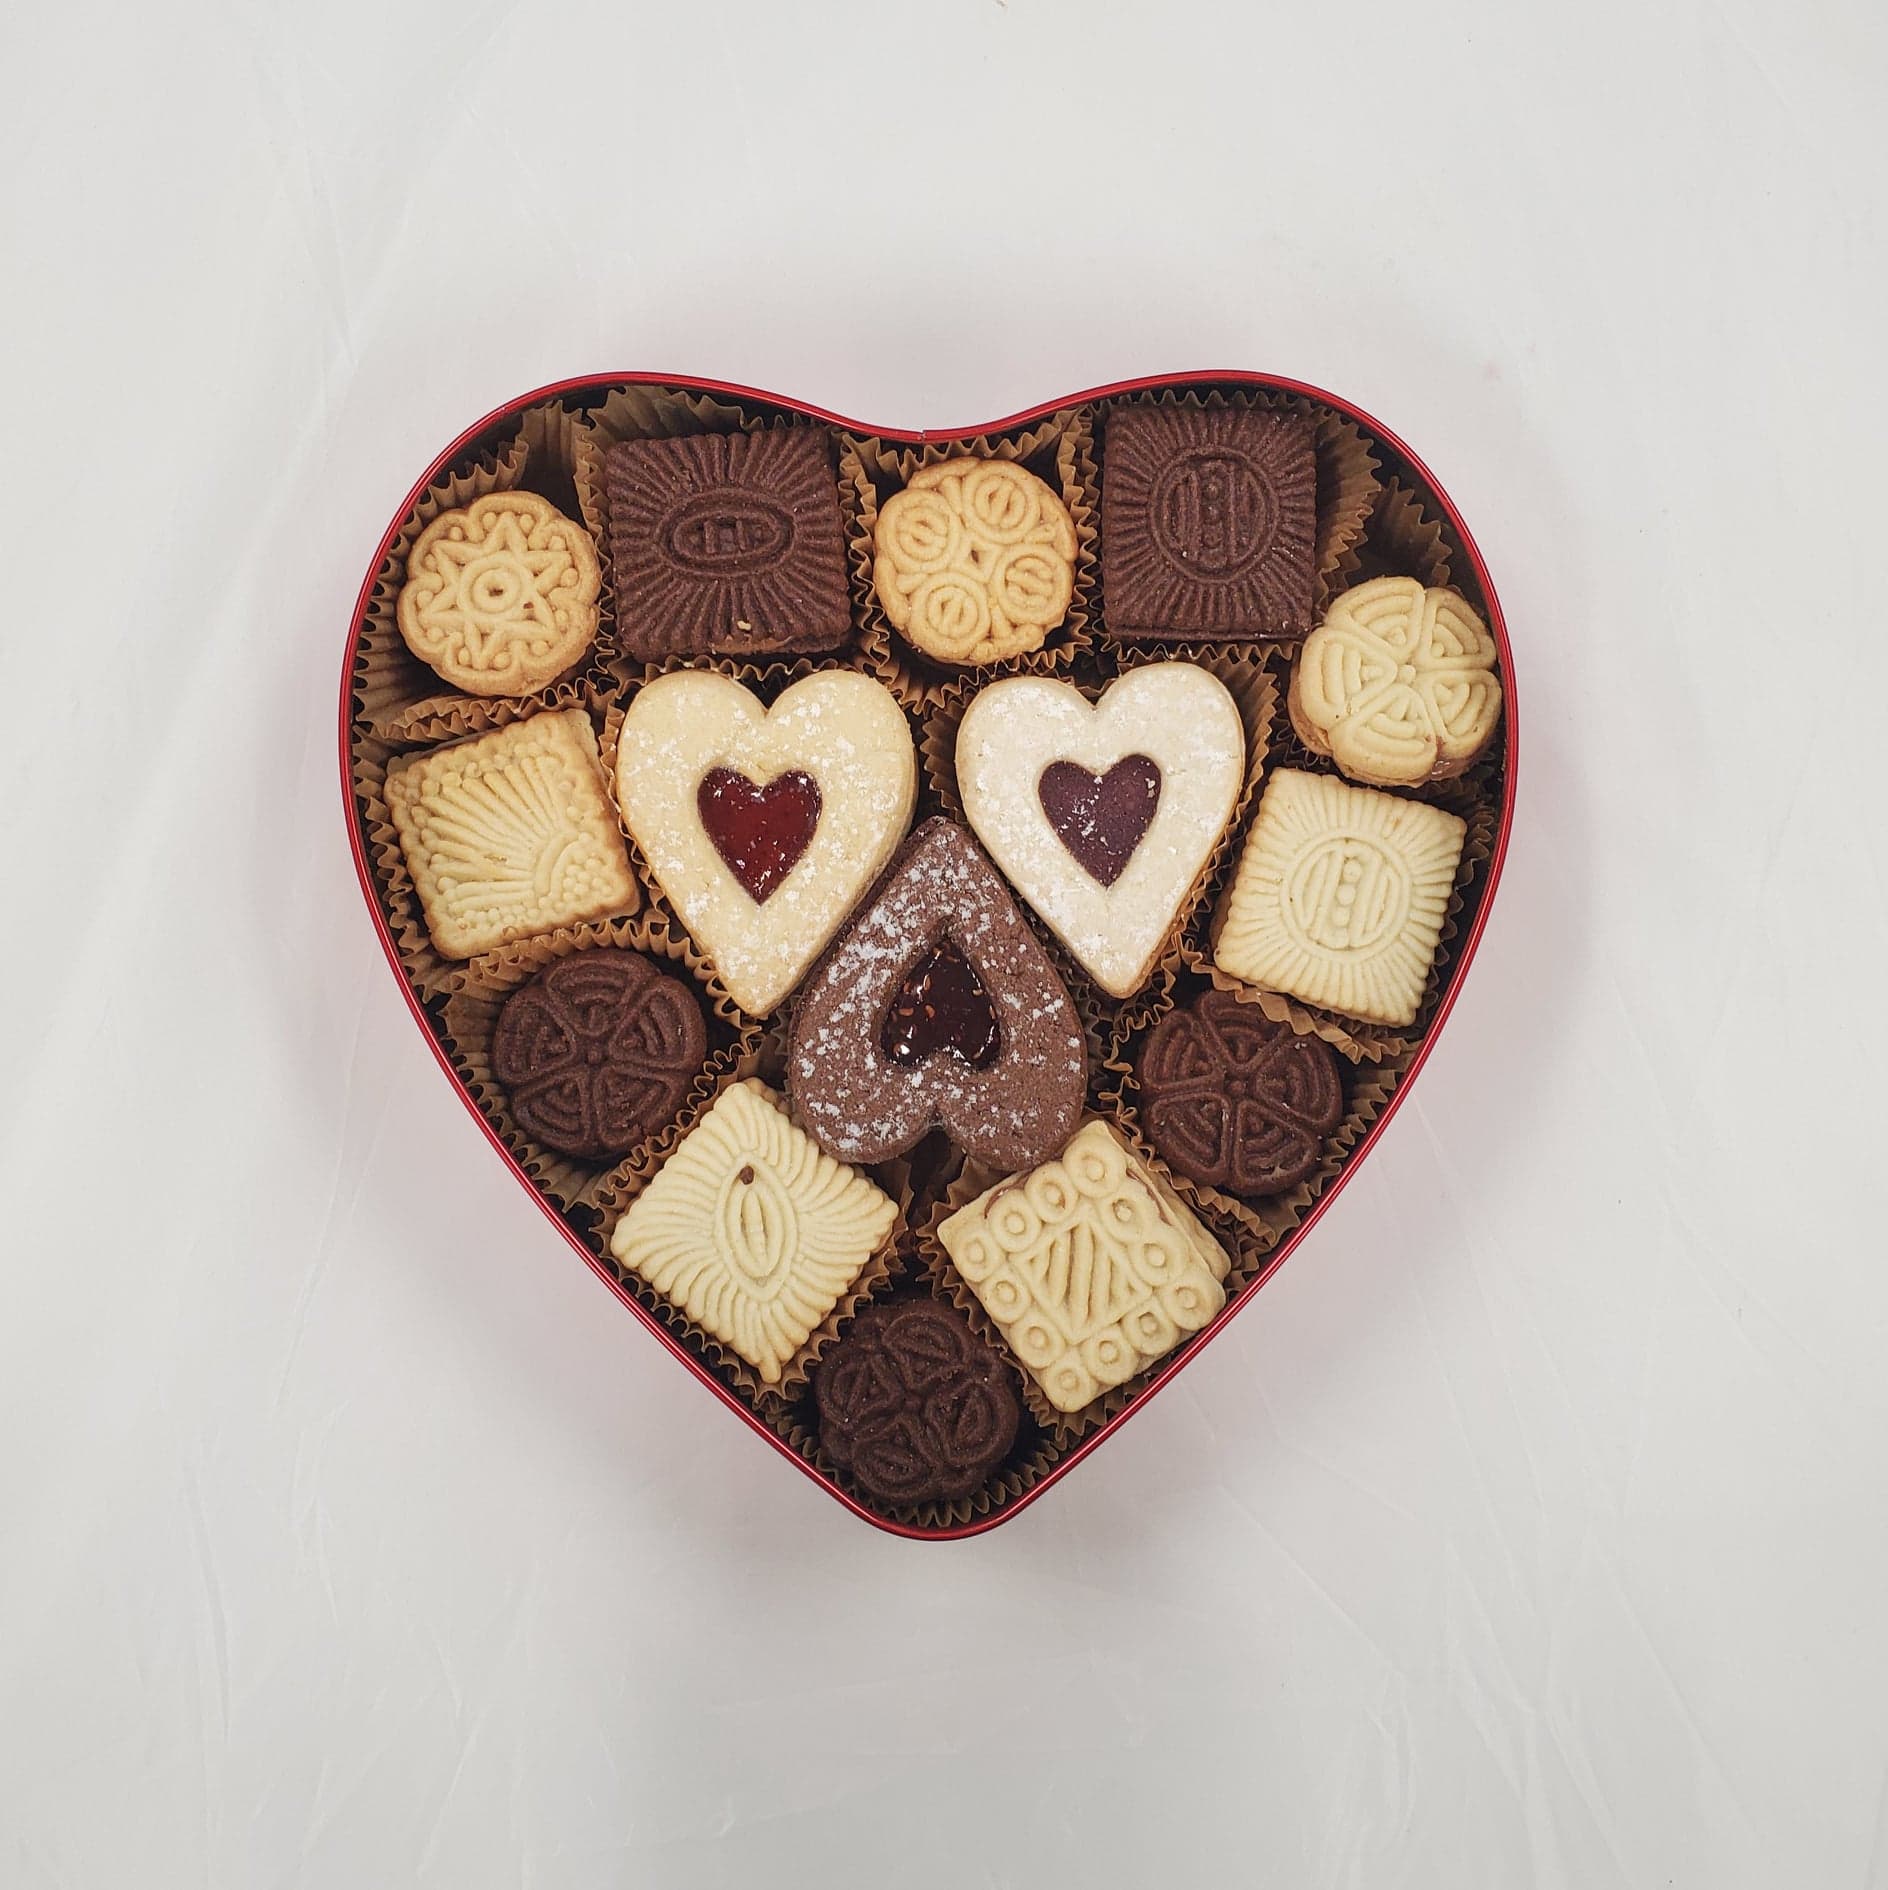 So Chic Collective Gift Guide 2021: Cookies Con Amore